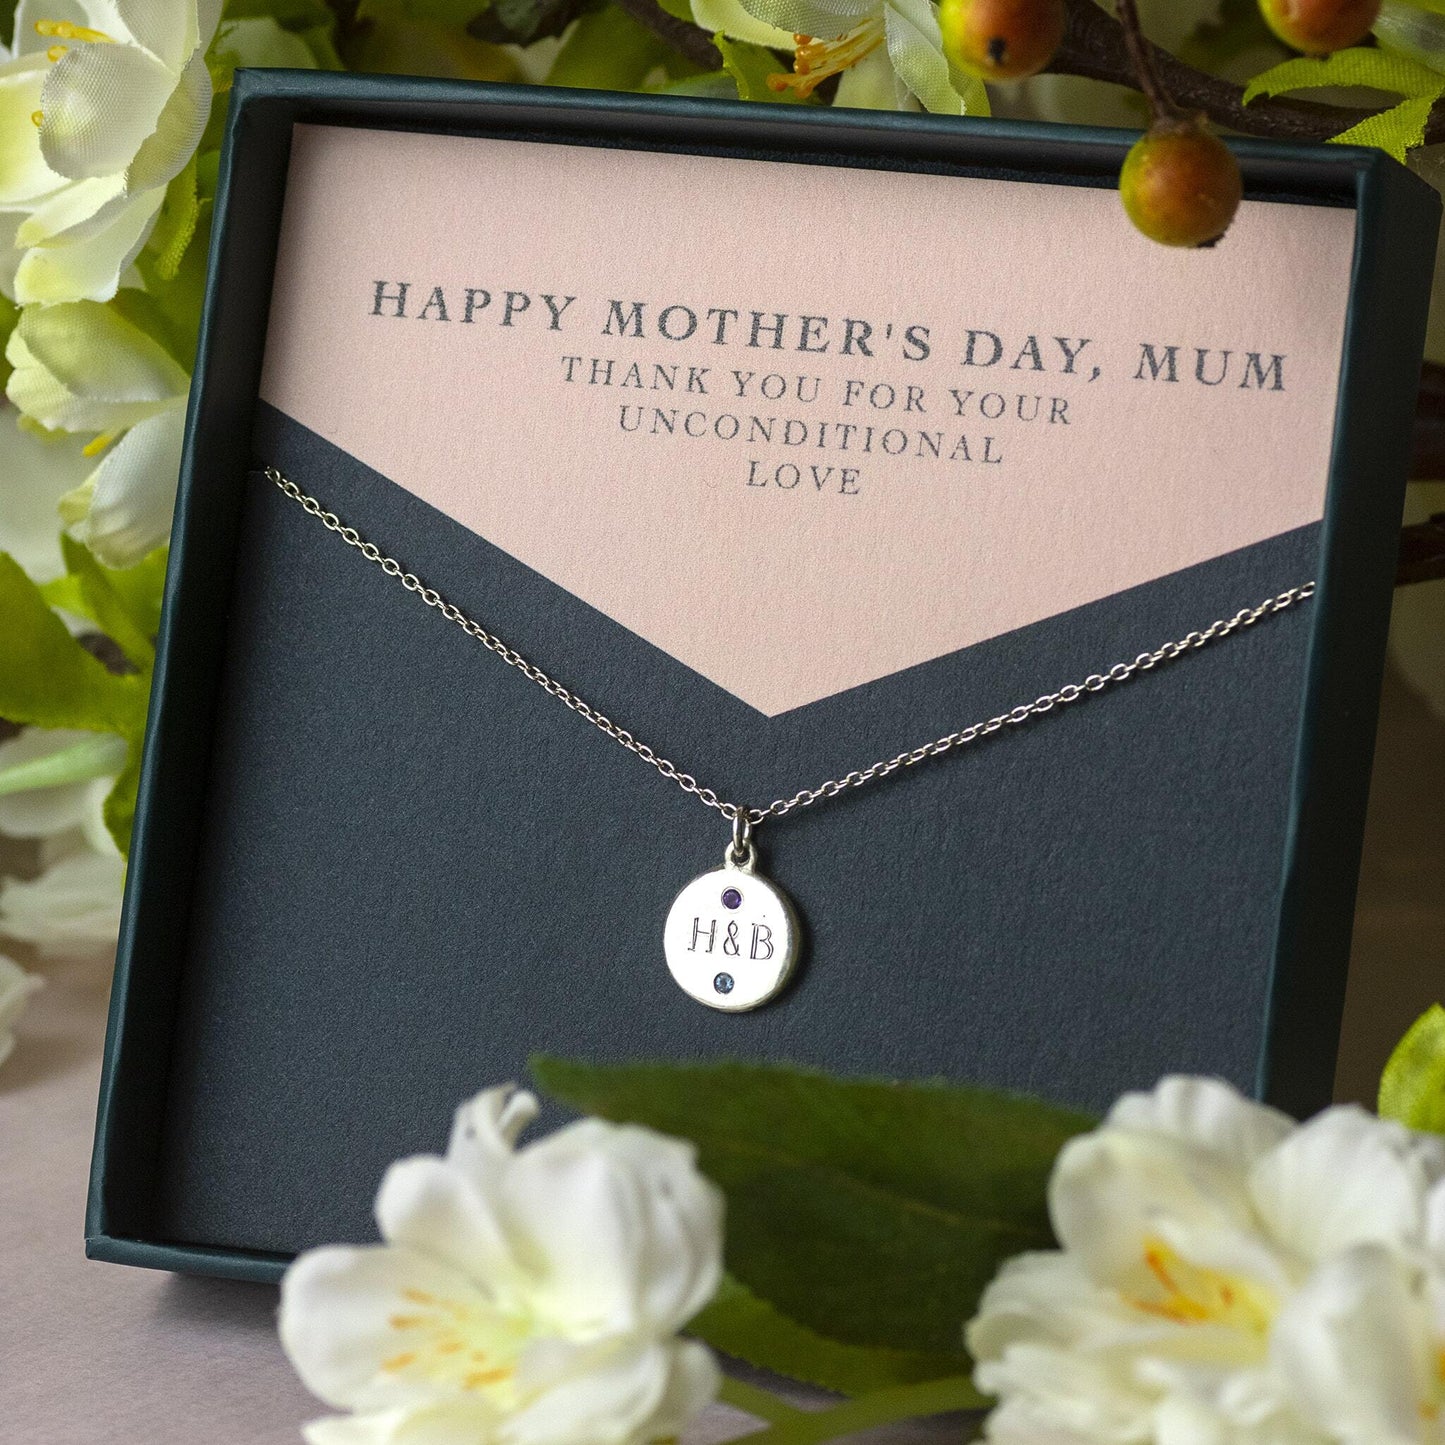 Mother's Day Gift - Personalised Engraved Pendant with Birthstones - Petite